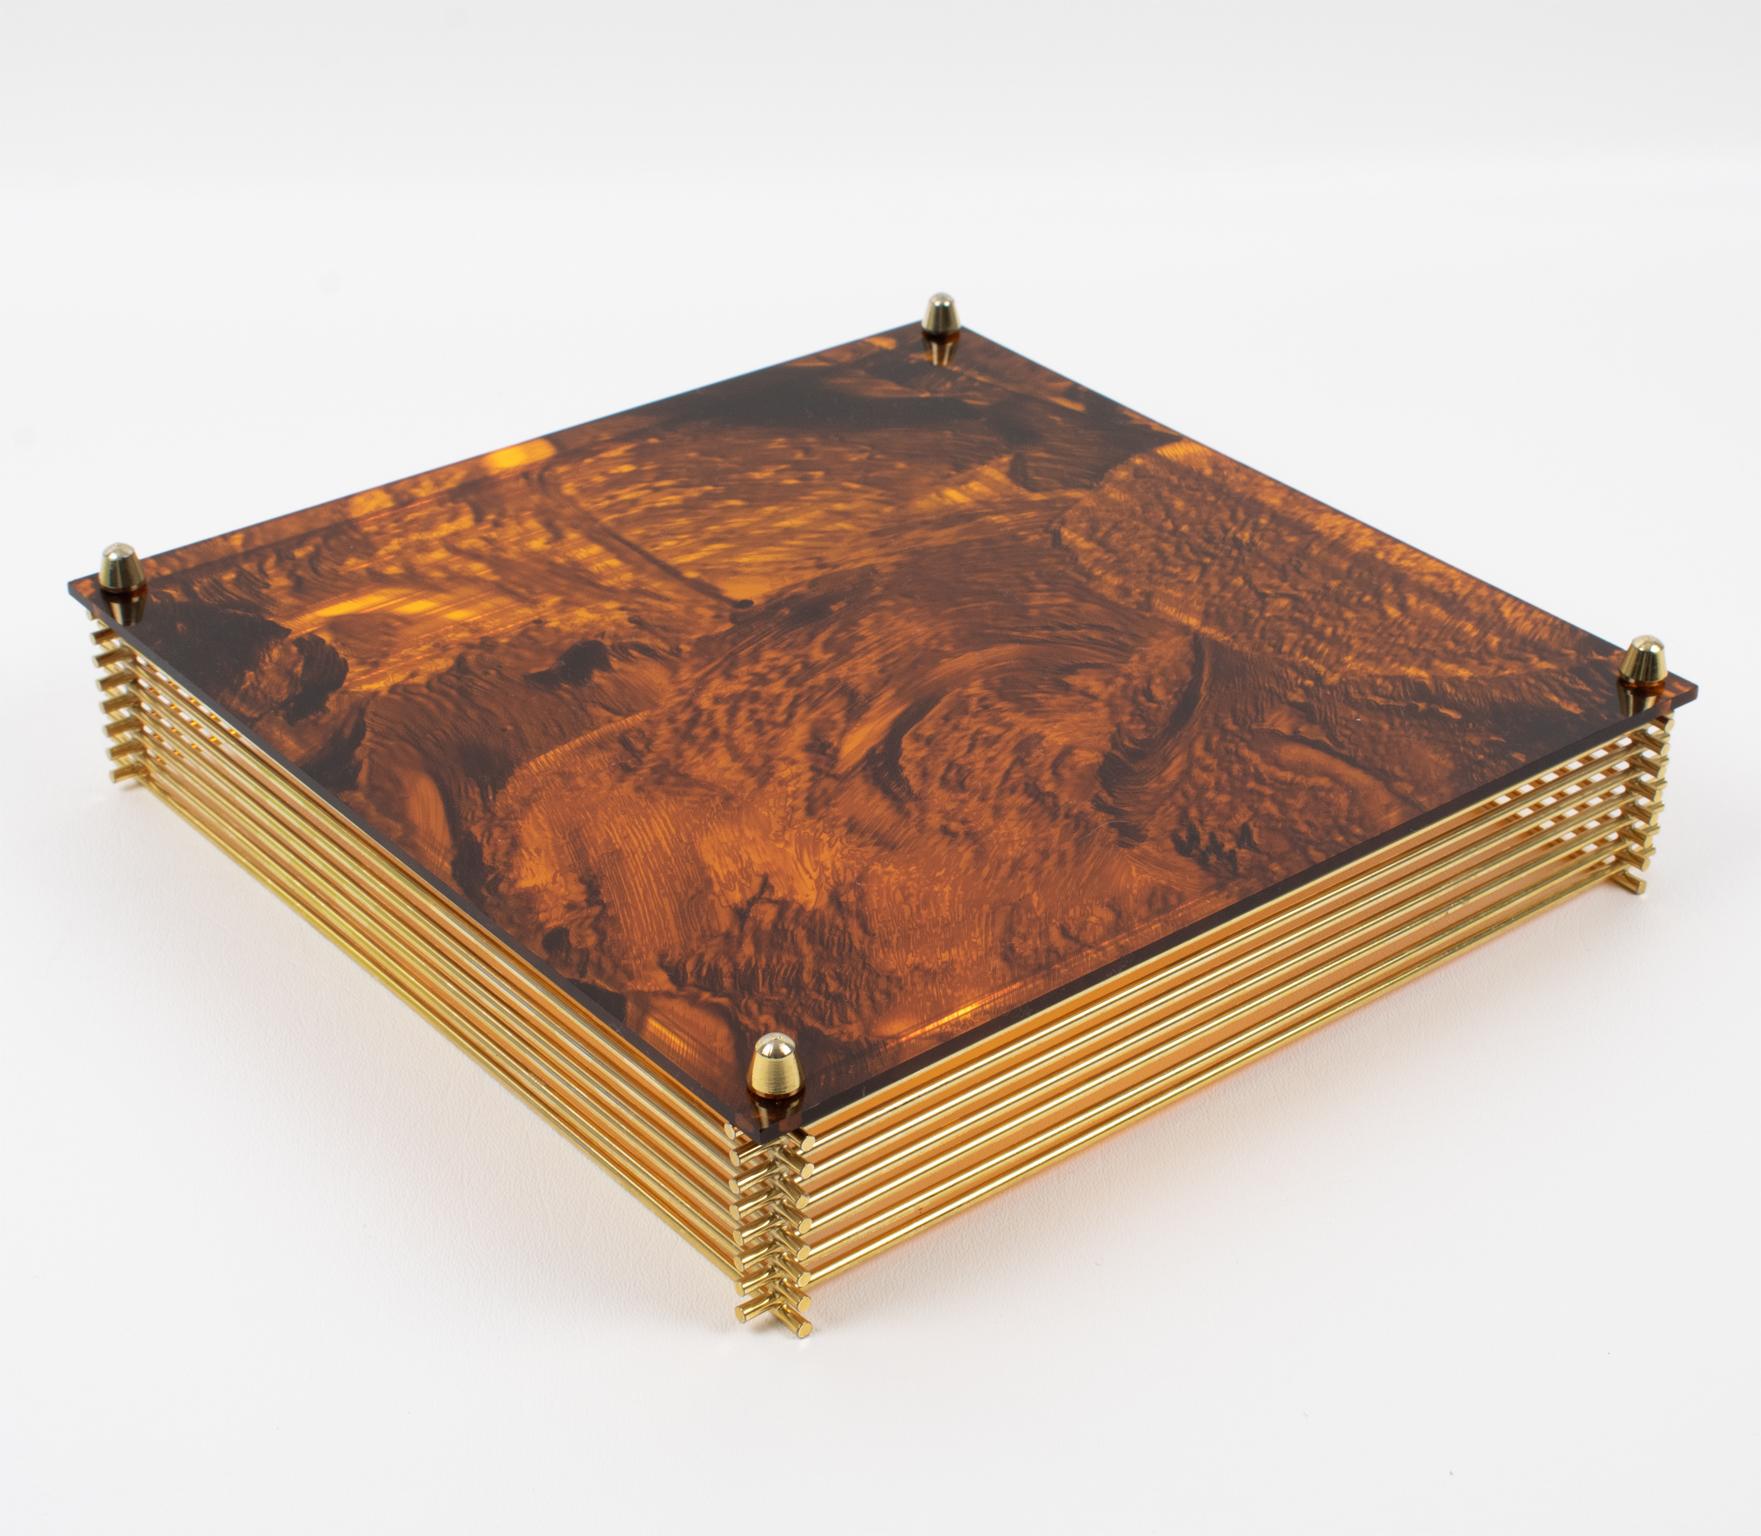 Brass and Tortoiseshell Lucite Barware Serving Tray, Italy 1970s For Sale 2